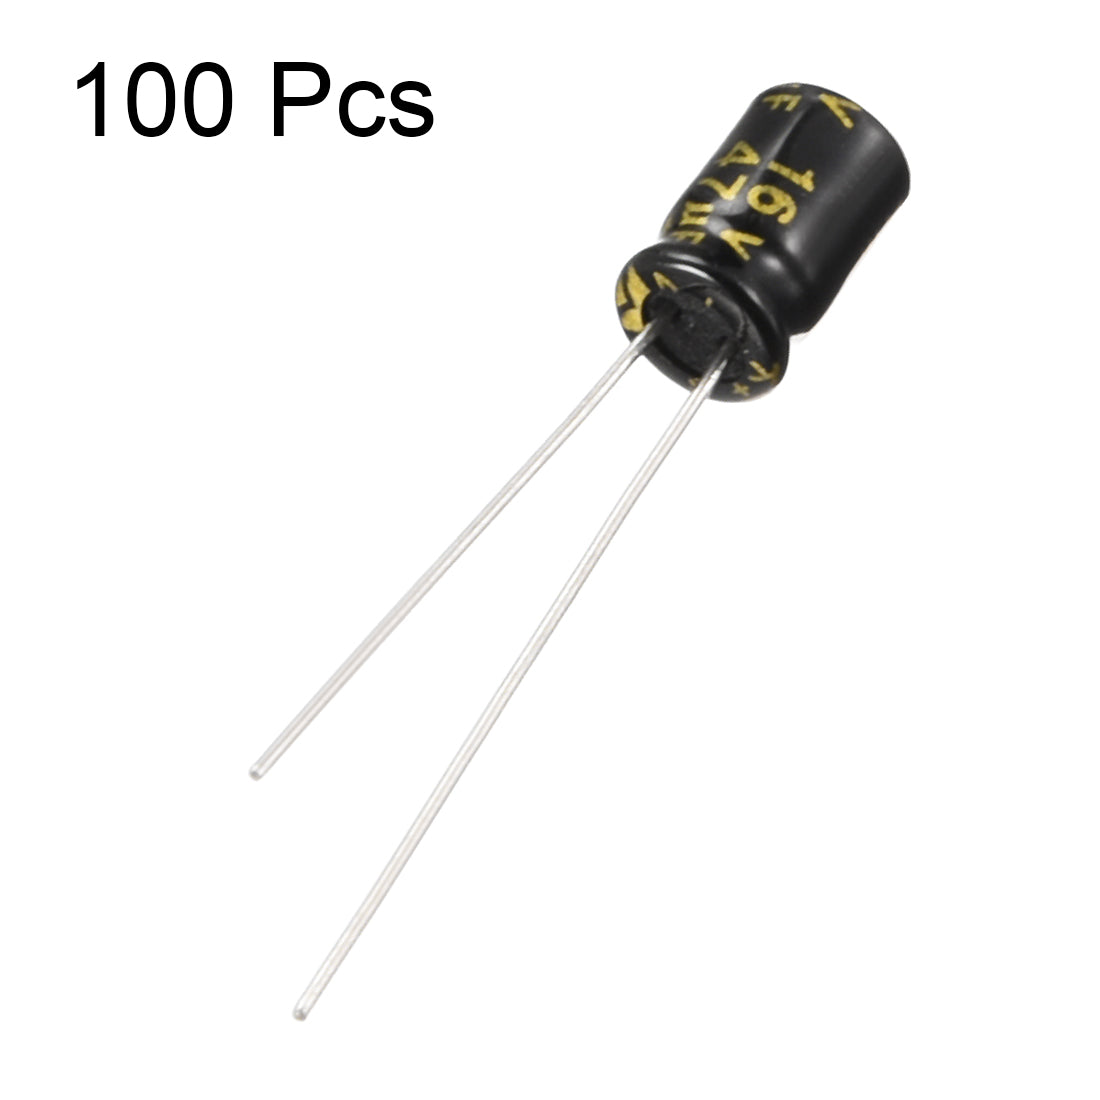 uxcell Uxcell Aluminum Radial Electrolytic Capacitor with 47uF 16V 105 Celsius Life 2000H 5 x 7 mm Black 100pcs